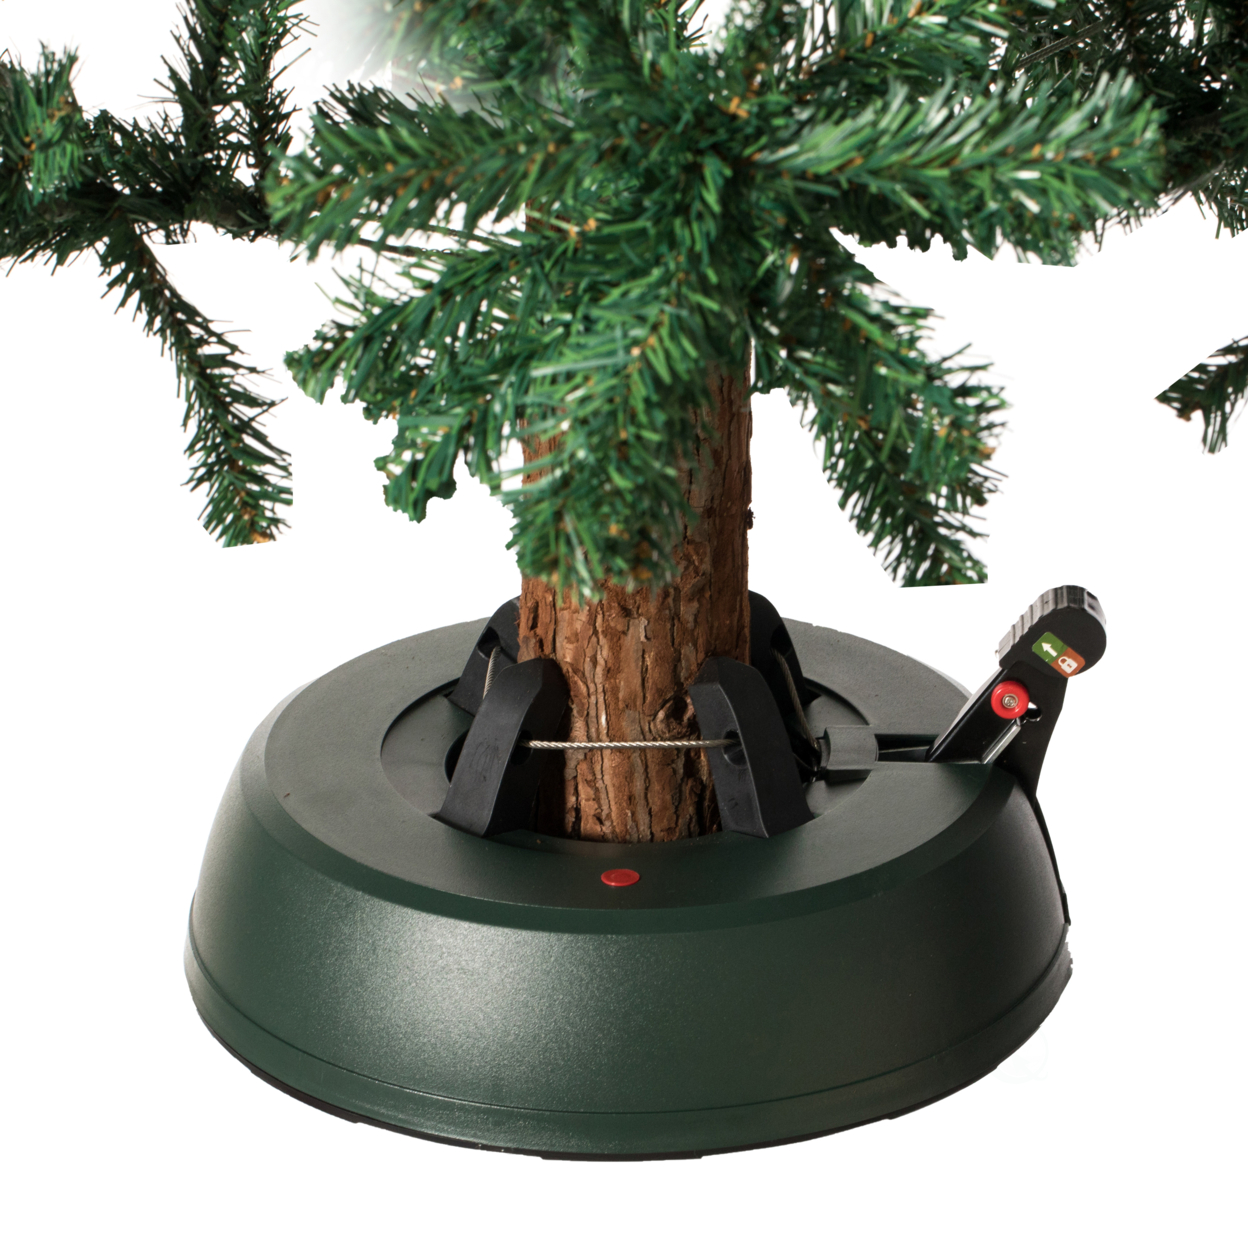 Automatic Plastic Green Foot Pedal Christmas Tree Stand - Small